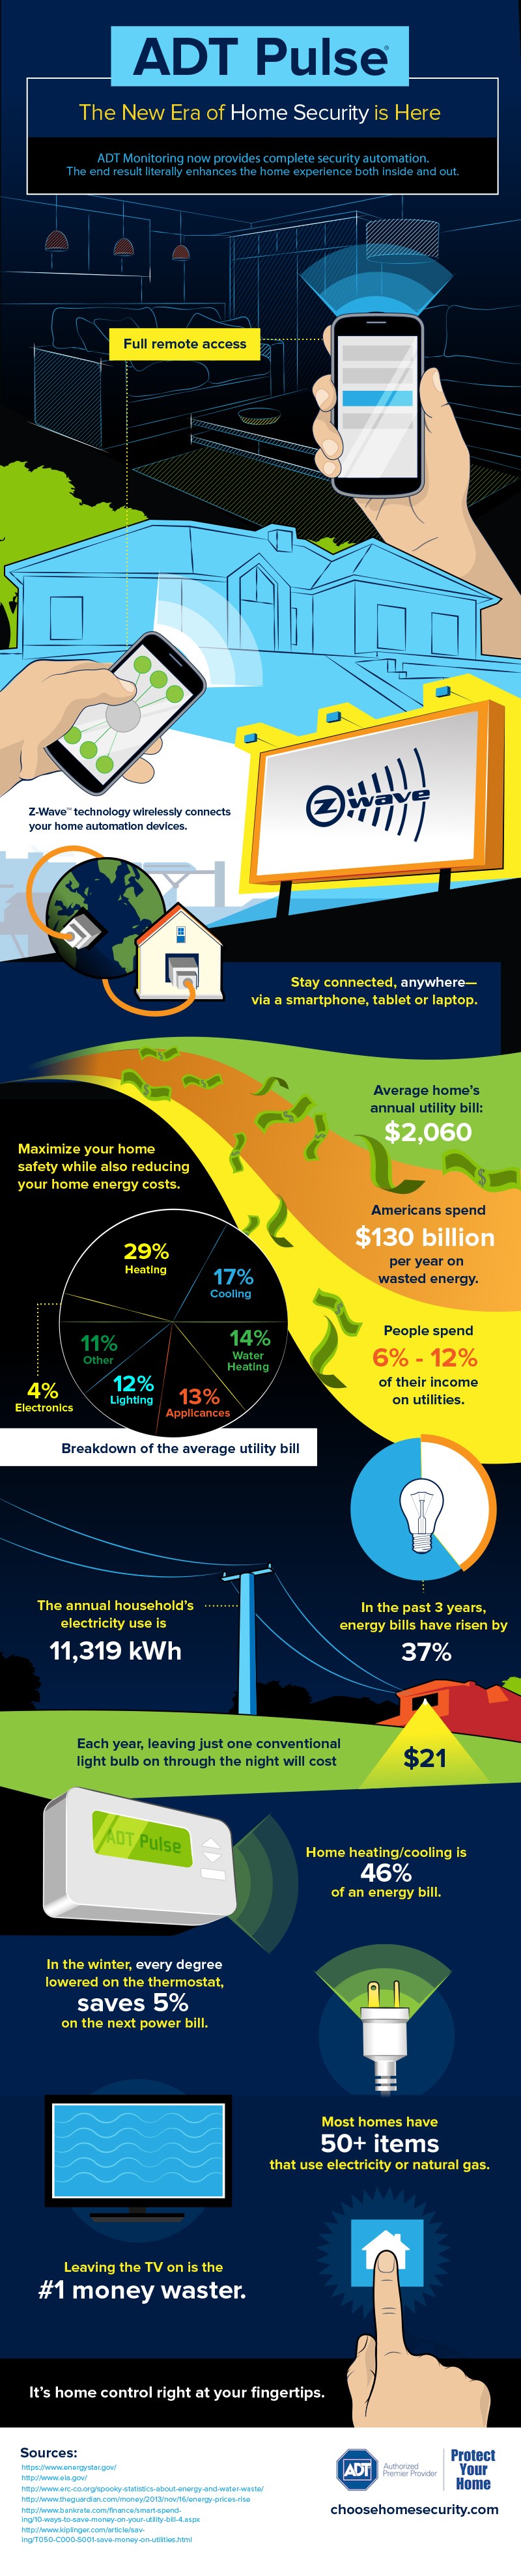 ADT Pulse Infographic